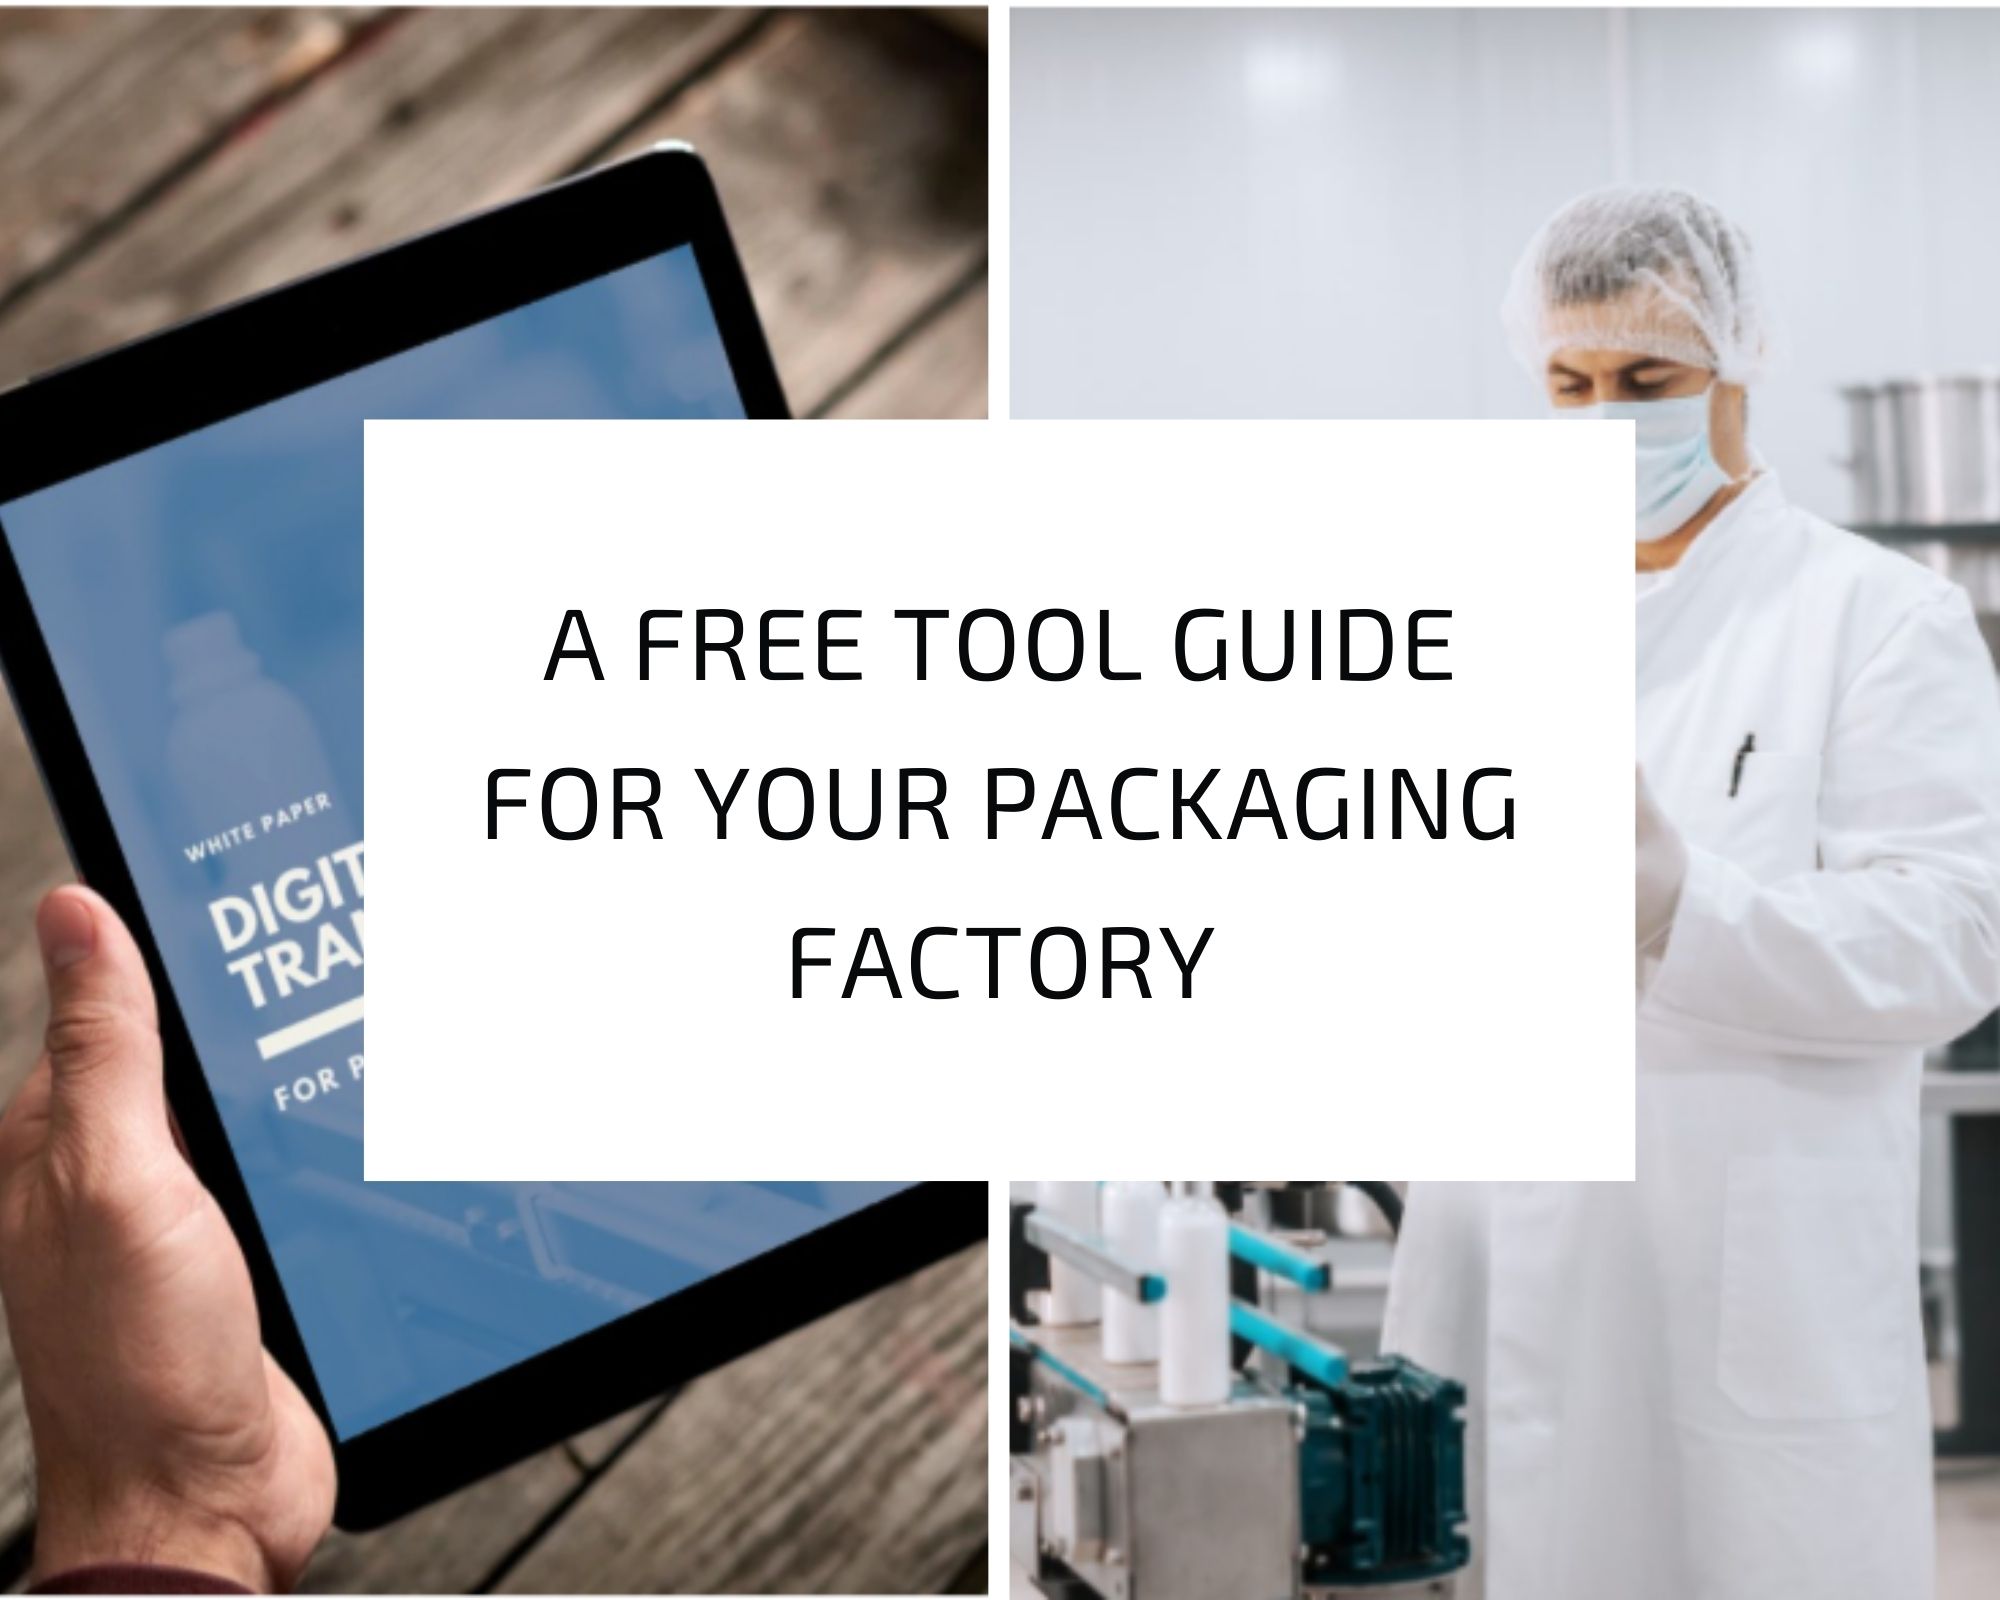 Free Tool Guide To Help Your Packaging Factory Reach Its Highest Potential